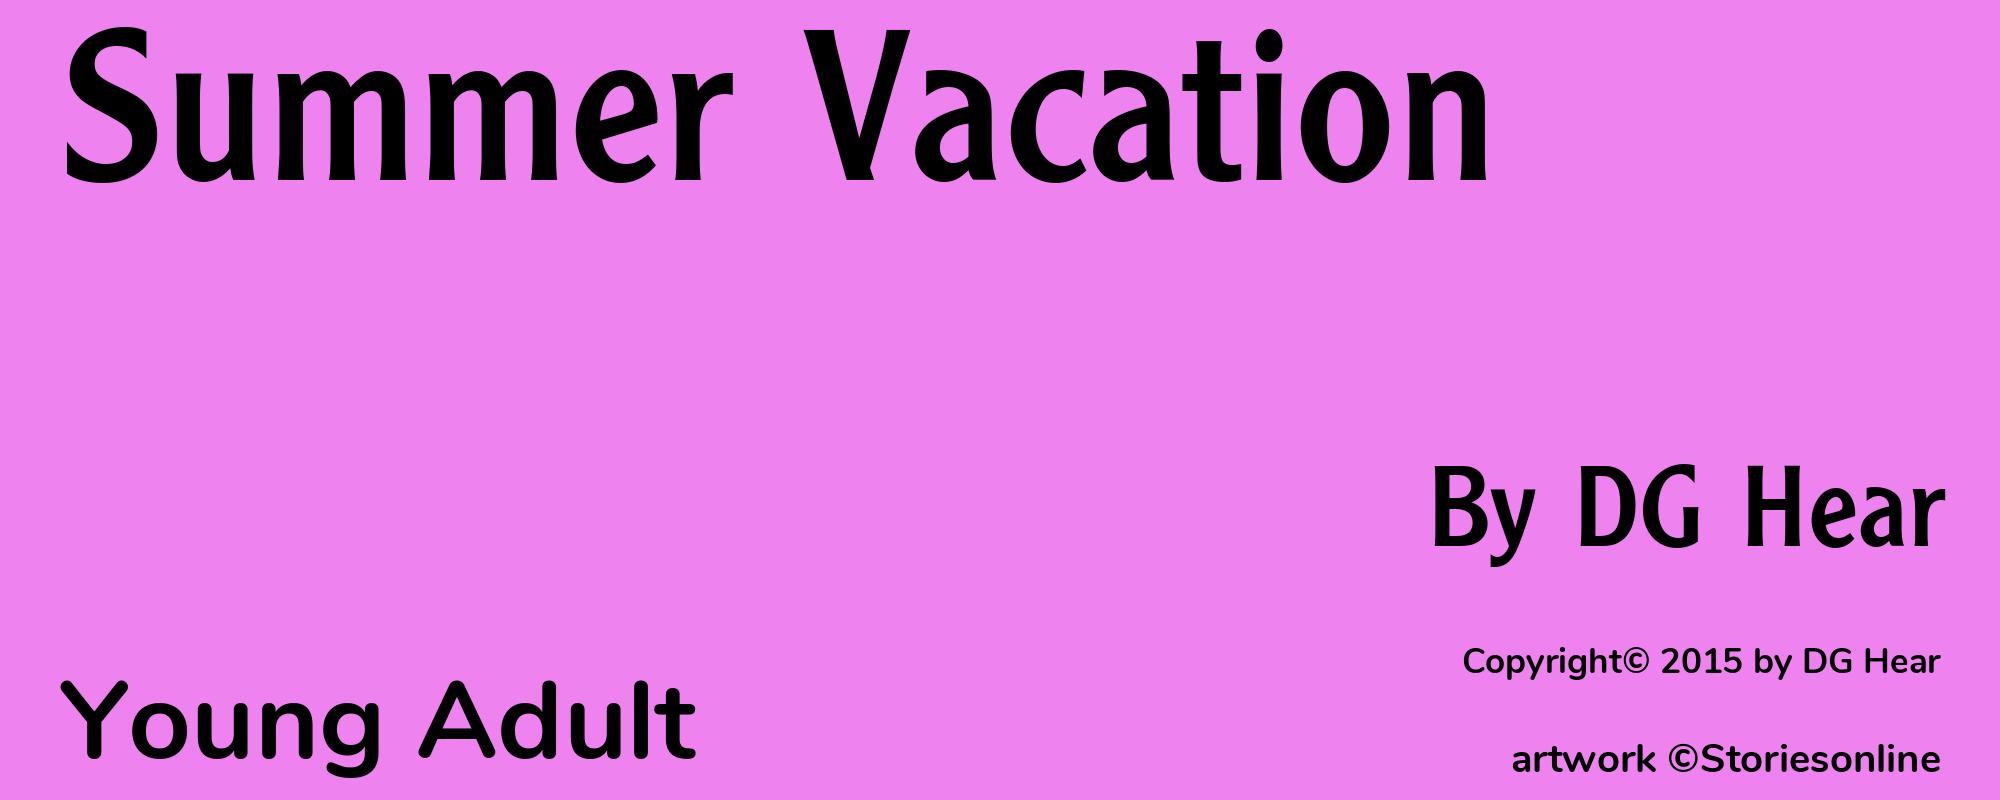 Summer Vacation - Cover